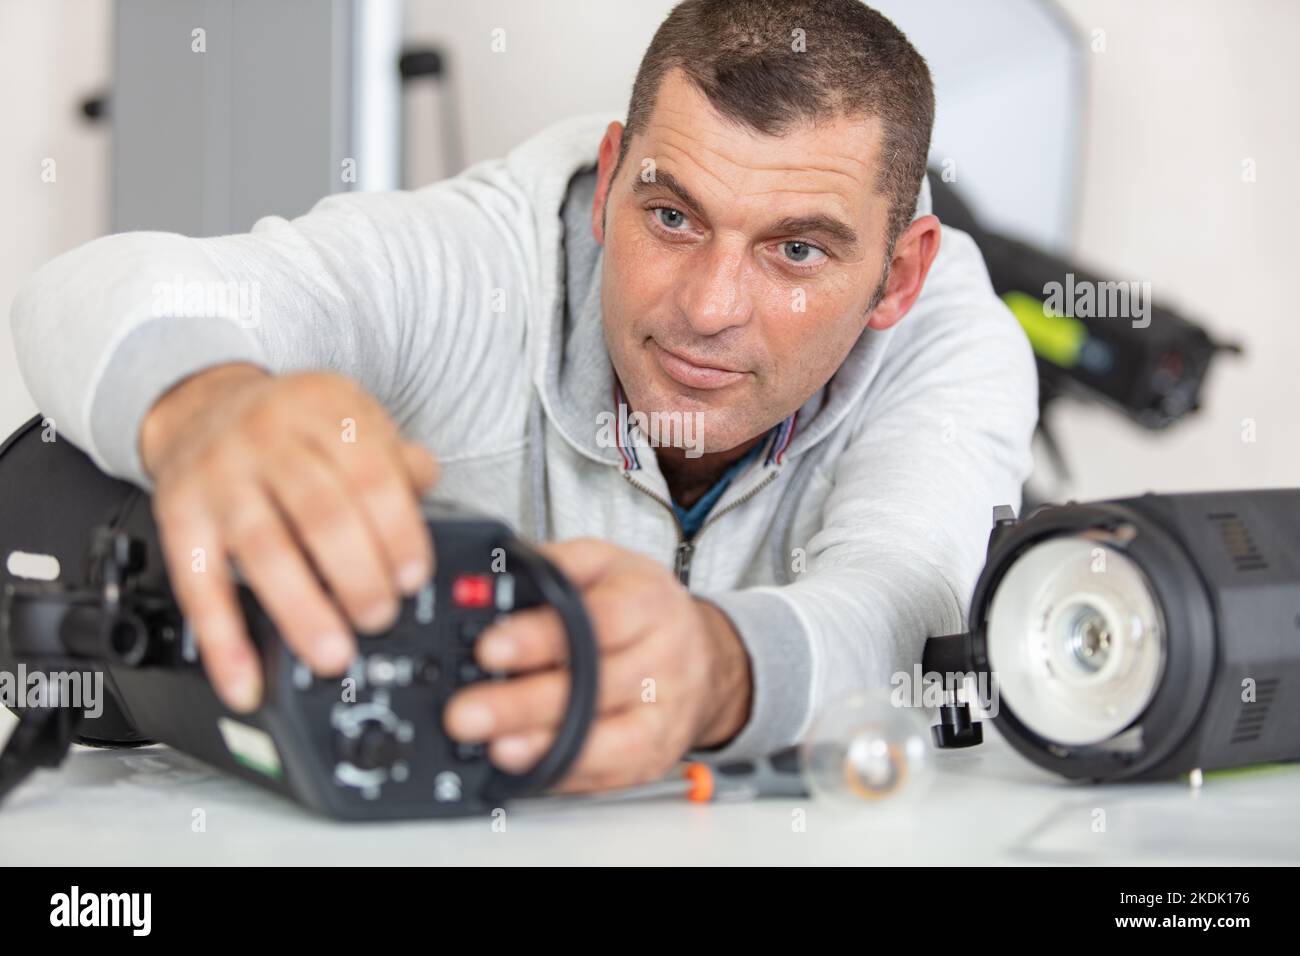 work place station having electronic devices equipments Stock Photo